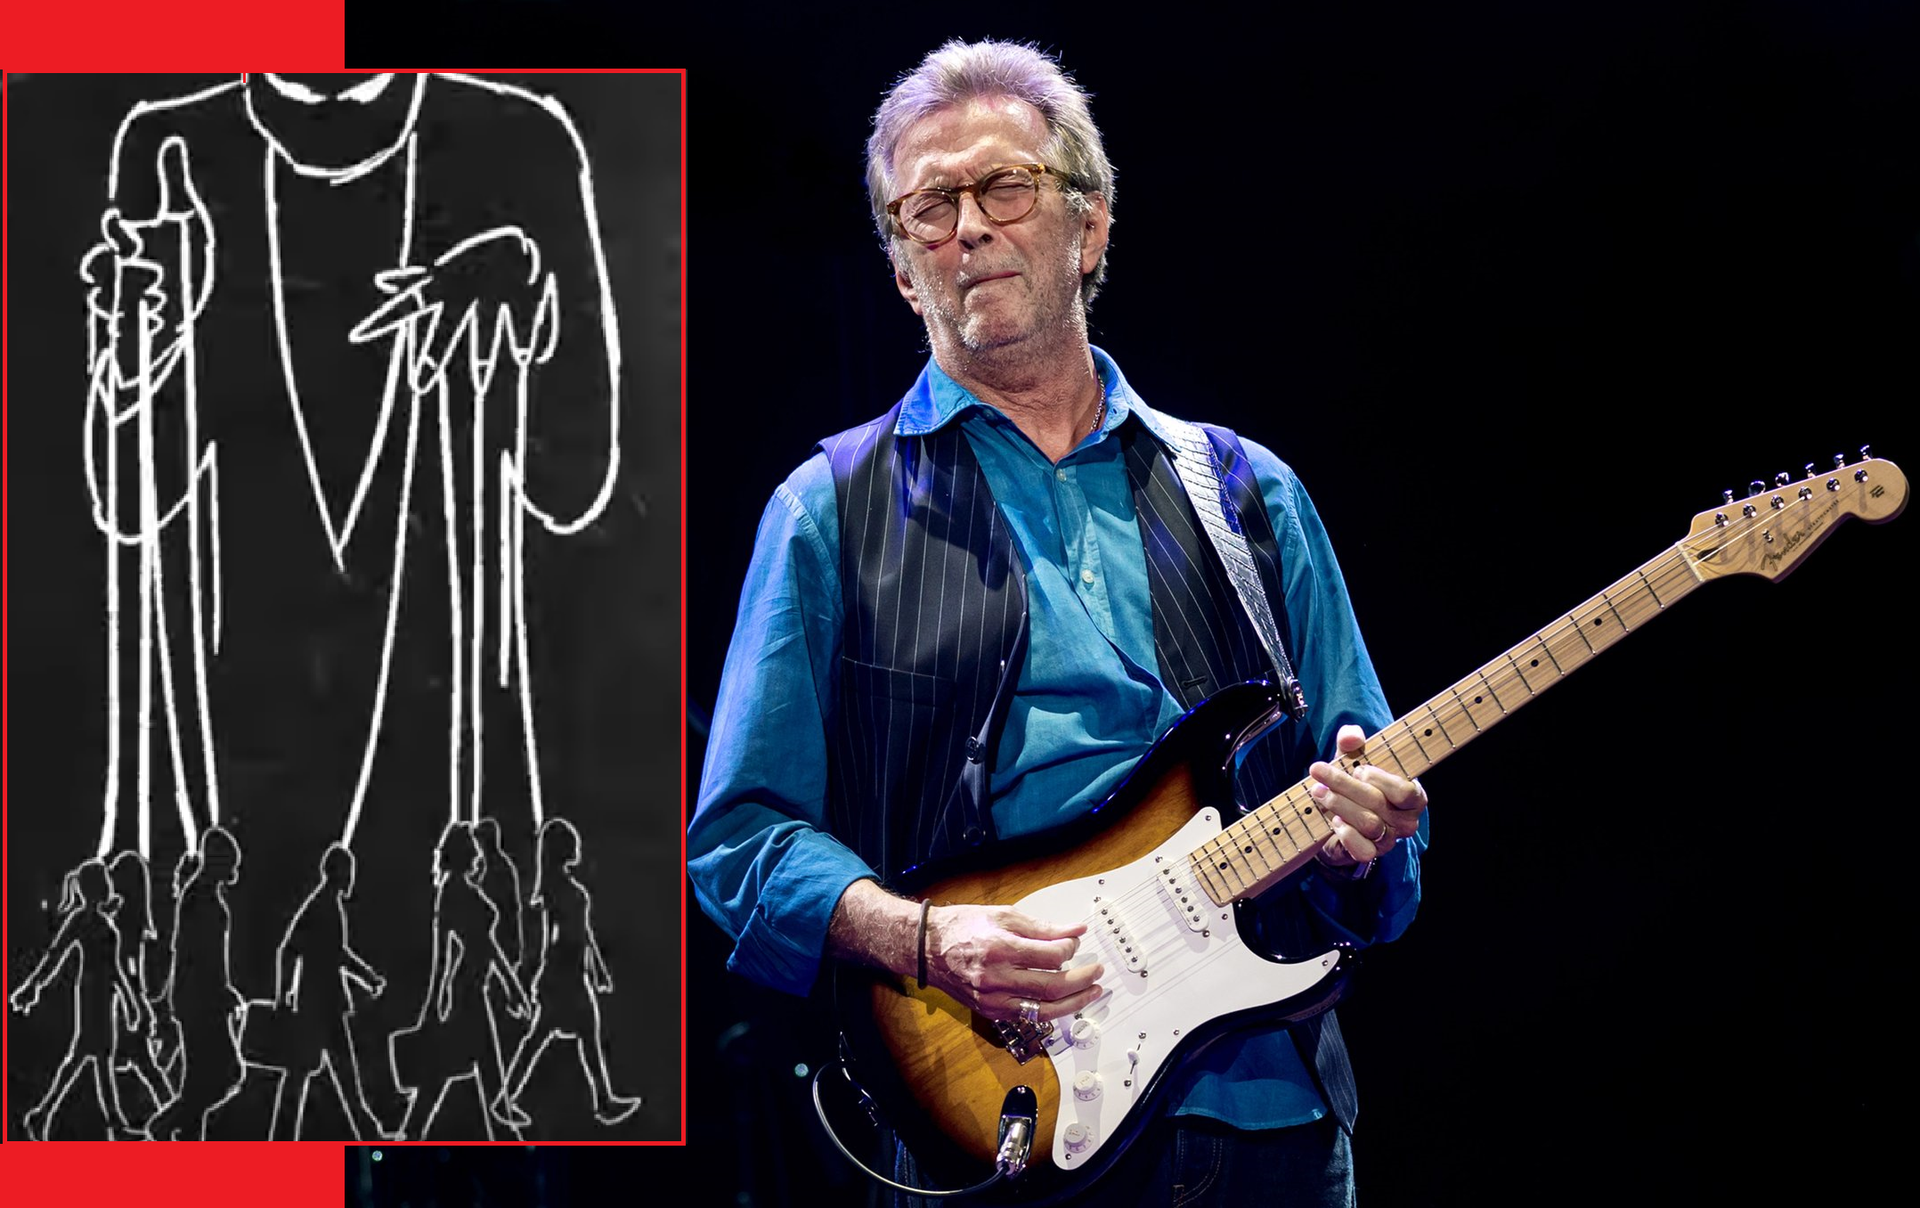 Eric Clapton sang about the new normality and that "he has had enough of this BS"